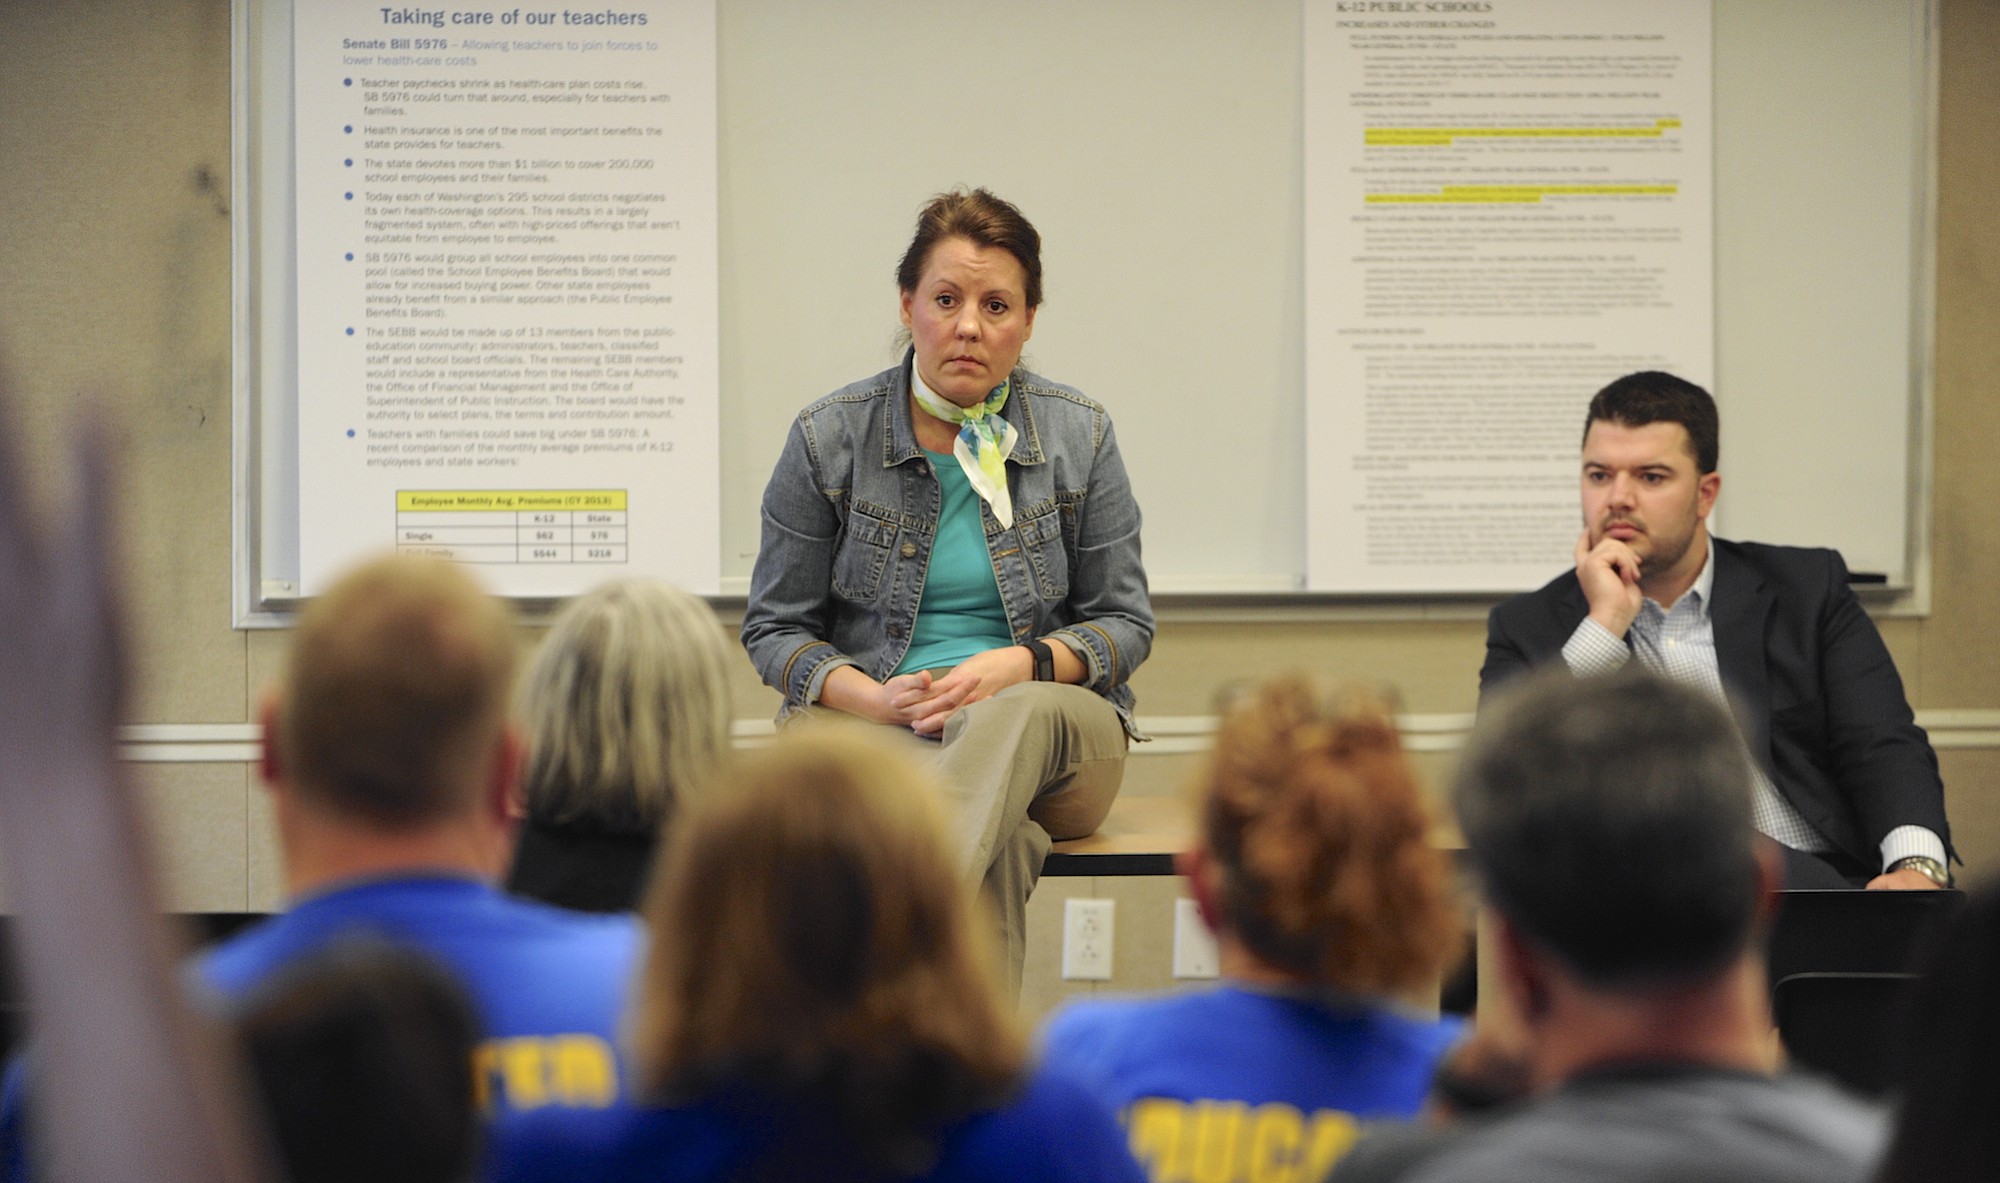 Sen. Ann Rivers, center, and Rep. Brandon Vick talk with teachers about funding K-12 education at the Camas Public Library on Saturday.